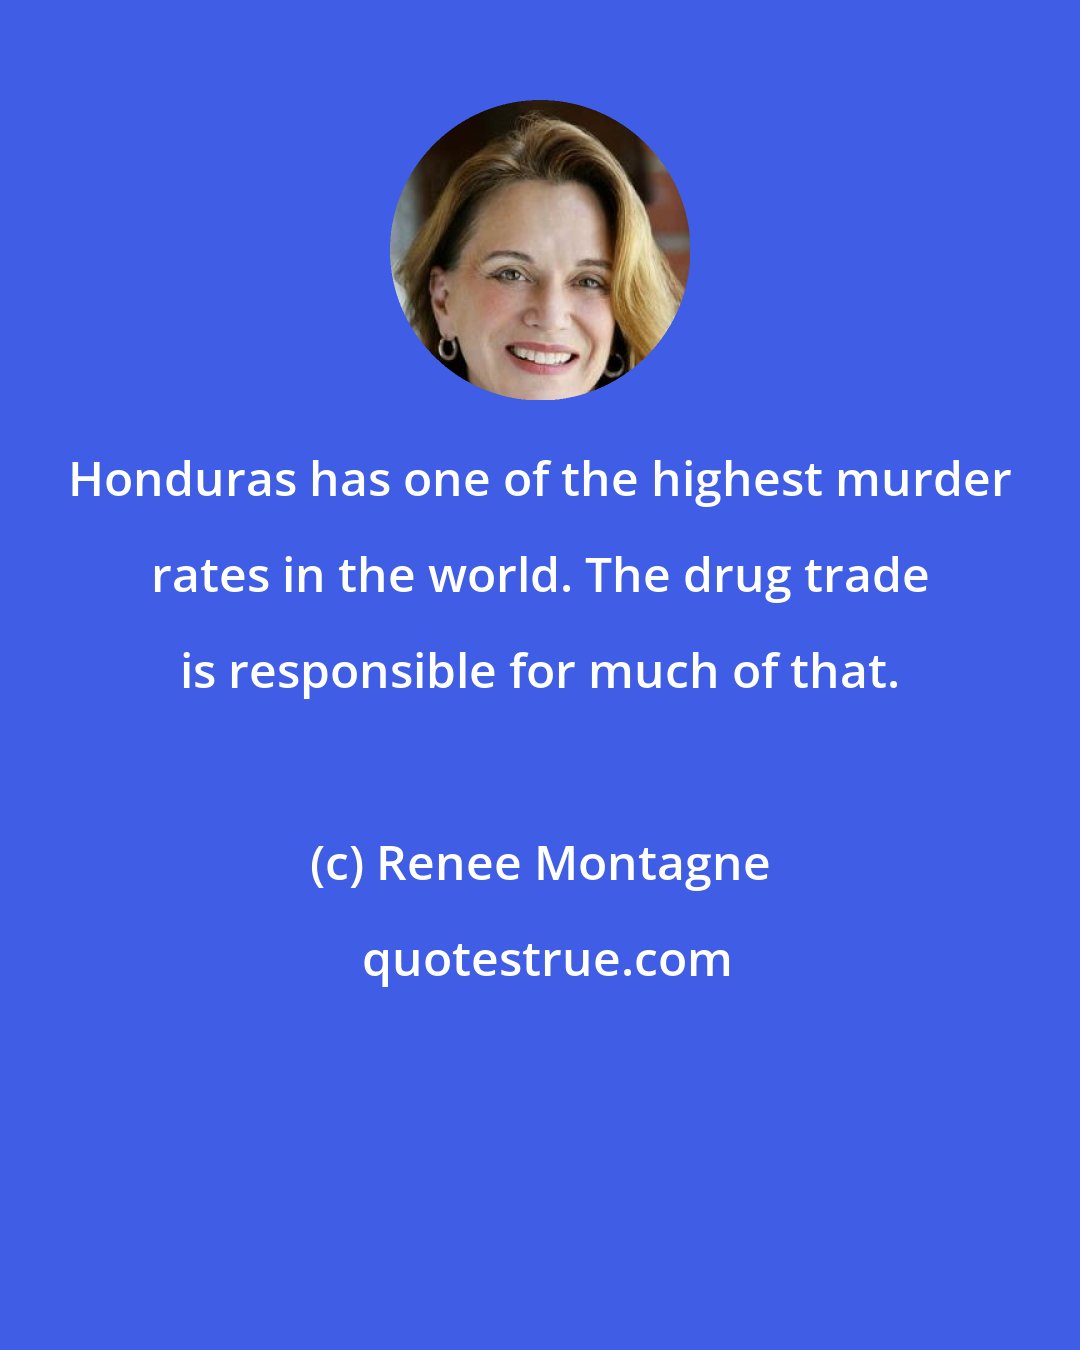 Renee Montagne: Honduras has one of the highest murder rates in the world. The drug trade is responsible for much of that.